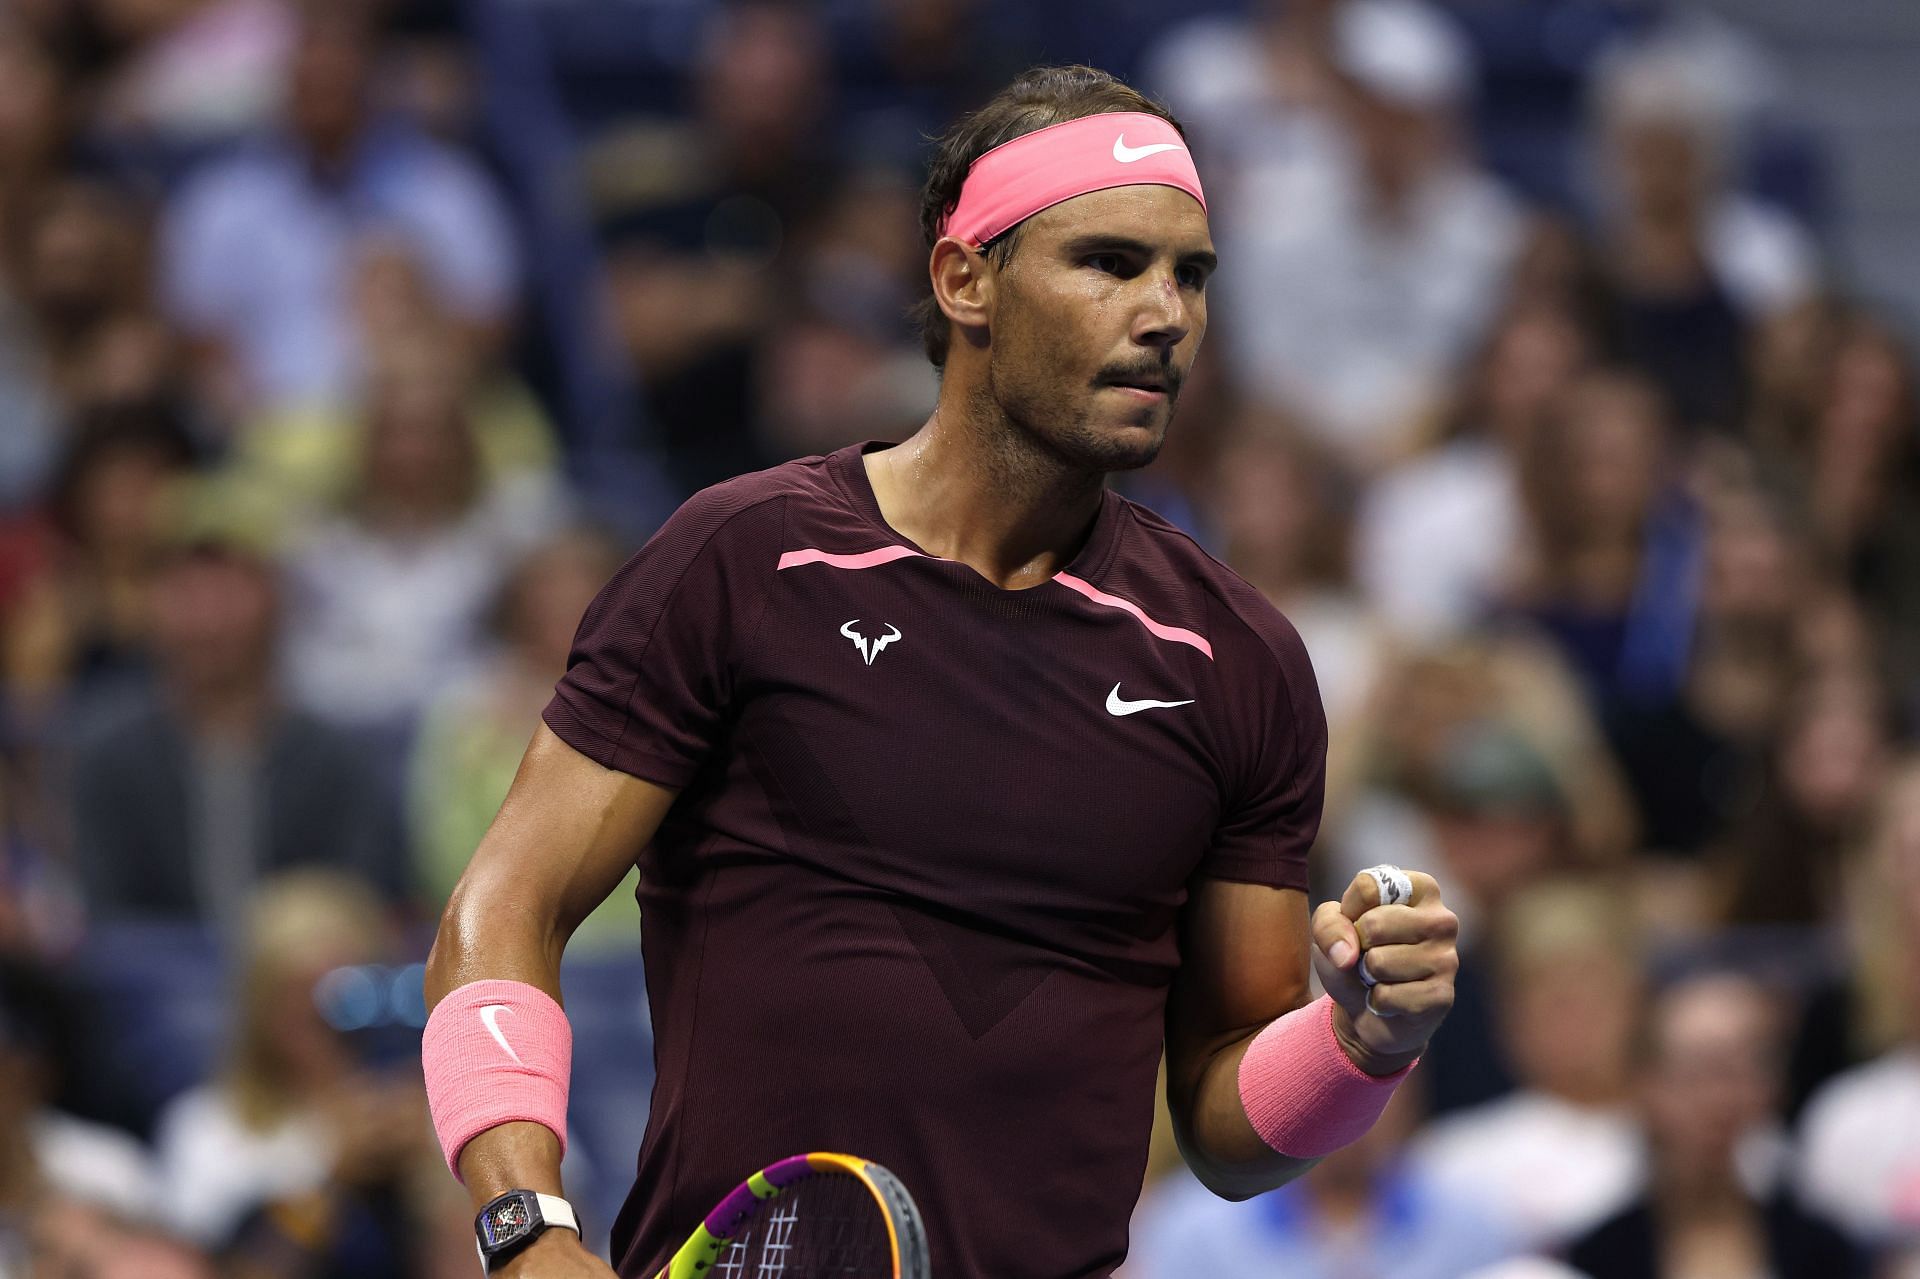 Rafael Nadal's post-US outfit rest of the 2022 season